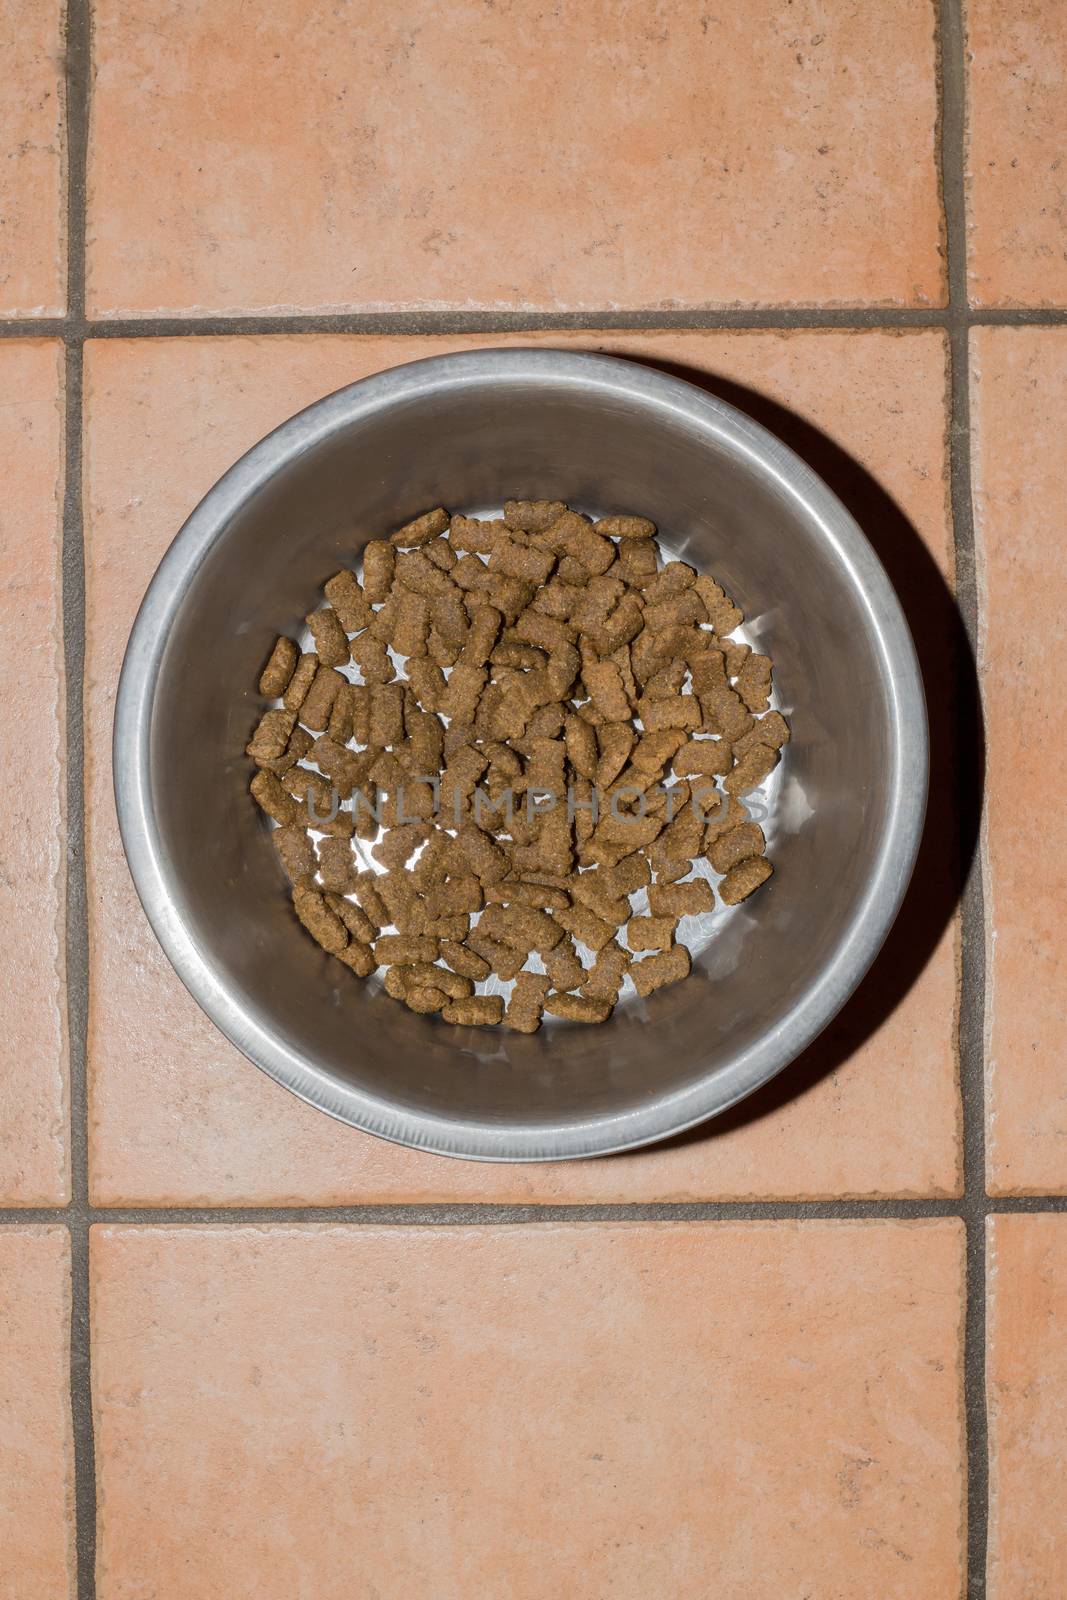 Bowl made of stainless steel with dog food